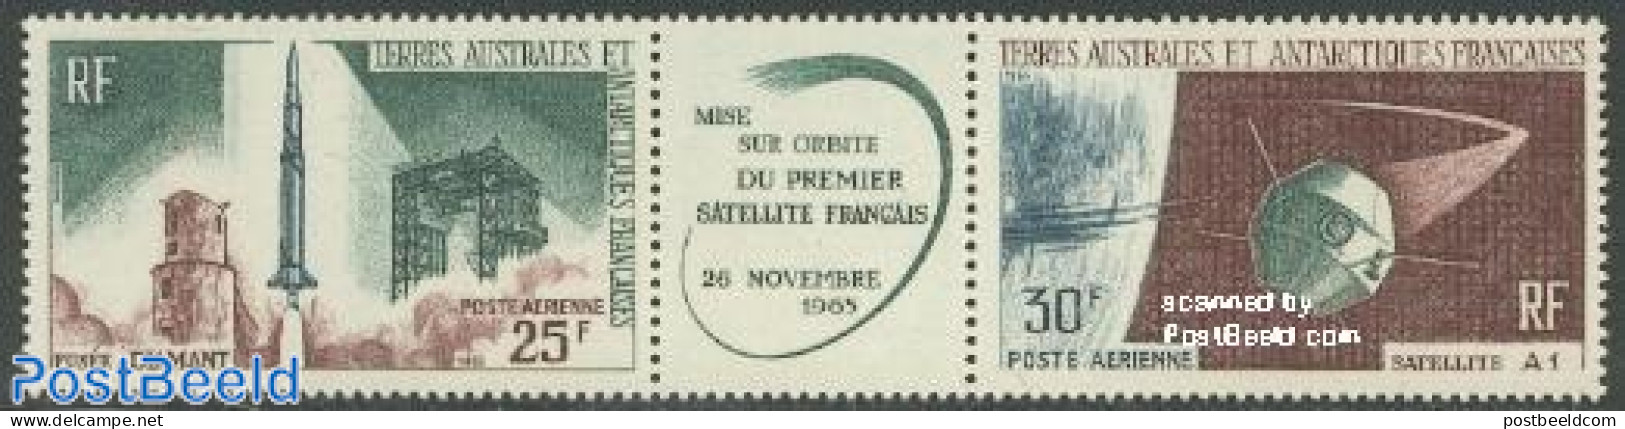 French Antarctic Territory 1966 Satellites 2v+tab [:T:], Mint NH, Transport - Various - Space Exploration - Joint Issues - Neufs